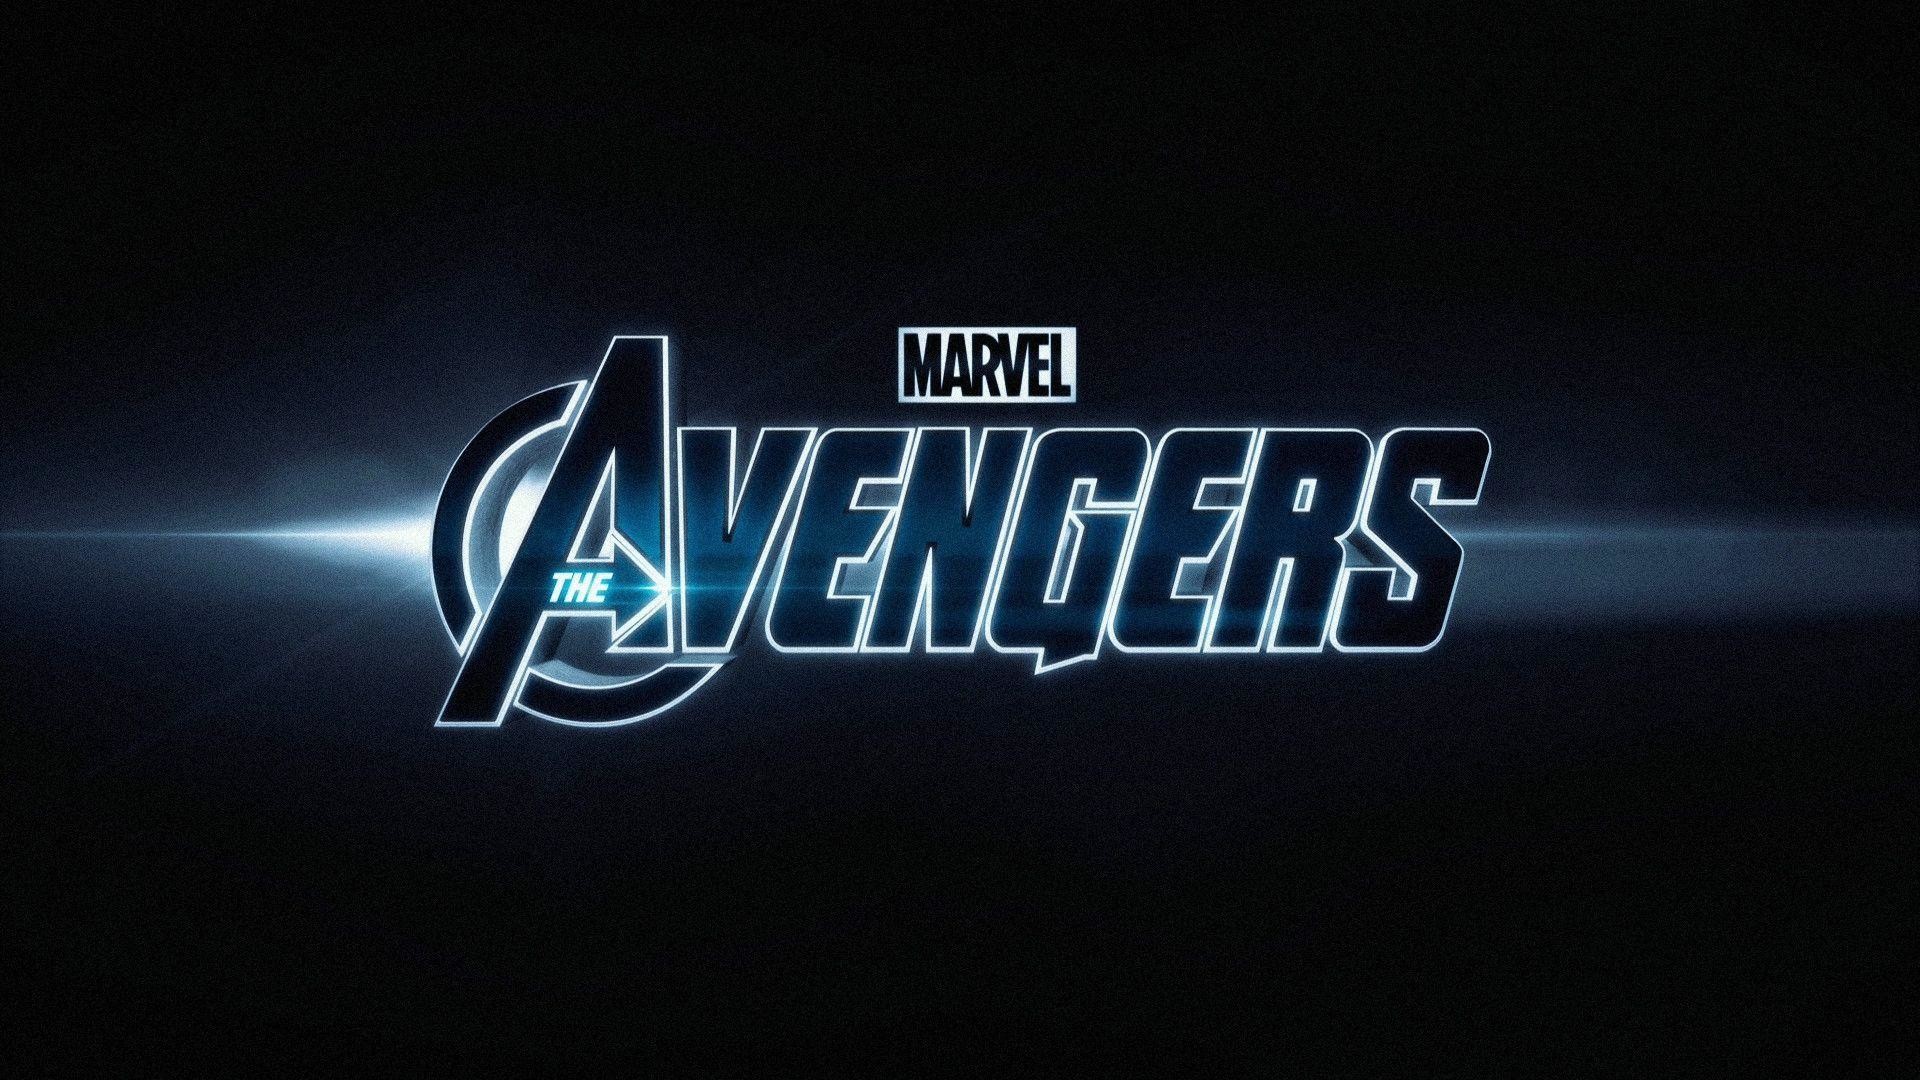 MCU Director Reveals How Avengers 5 Could Be 'Bigger' Than Endgame